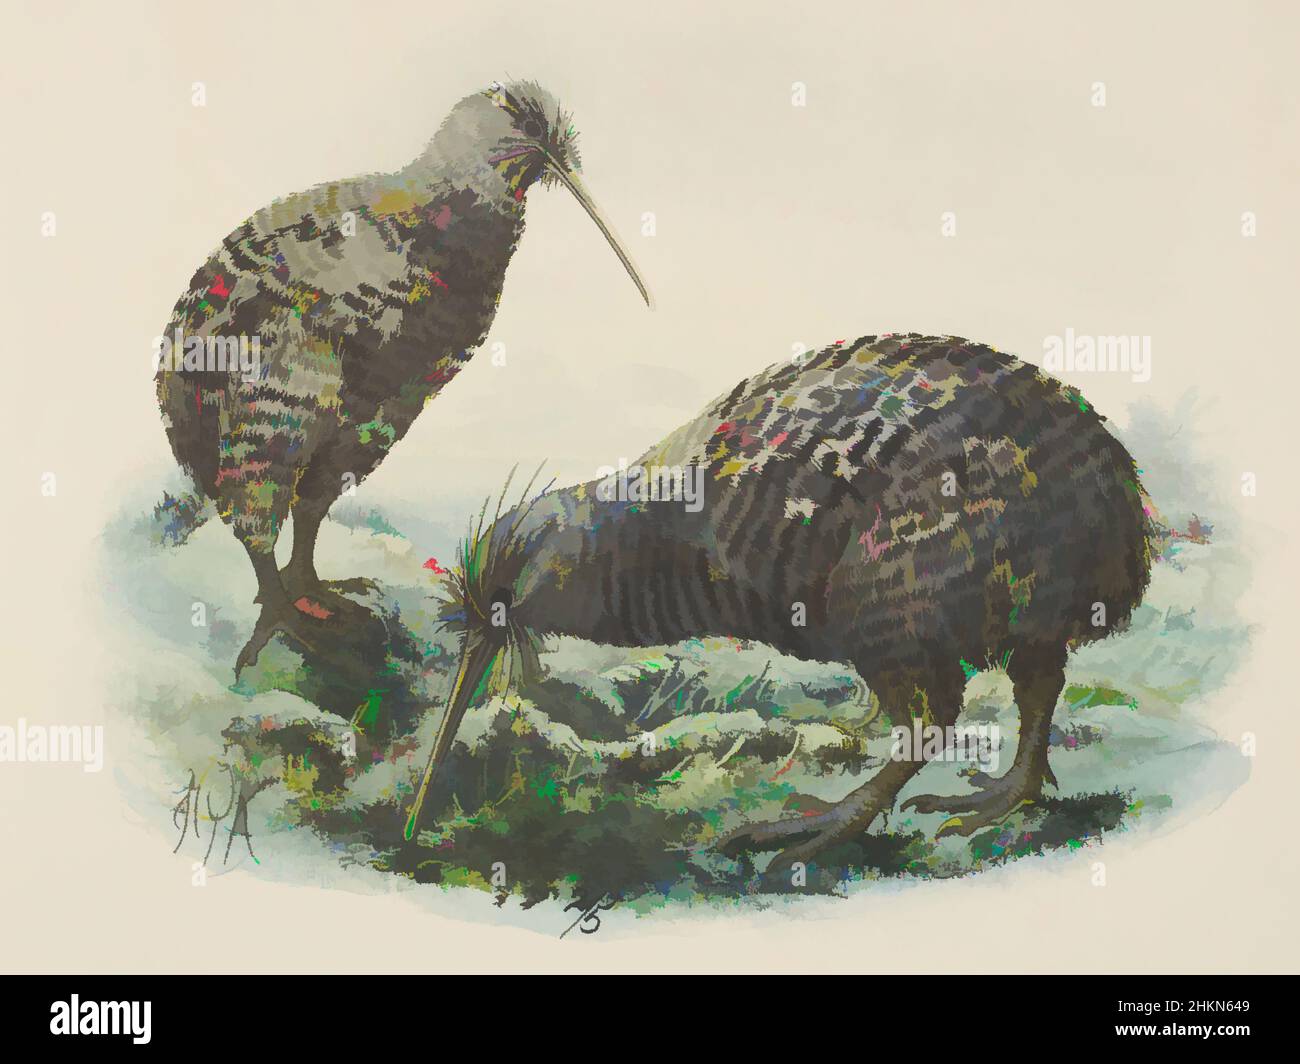 Art inspired by Little spotted kiwi (Apteryx owenii), Johannes Keulemans, artist, 1872, London, lithography, Classic works modernized by Artotop with a splash of modernity. Shapes, color and value, eye-catching visual impact on art. Emotions through freedom of artworks in a contemporary way. A timeless message pursuing a wildly creative new direction. Artists turning to the digital medium and creating the Artotop NFT Stock Photo